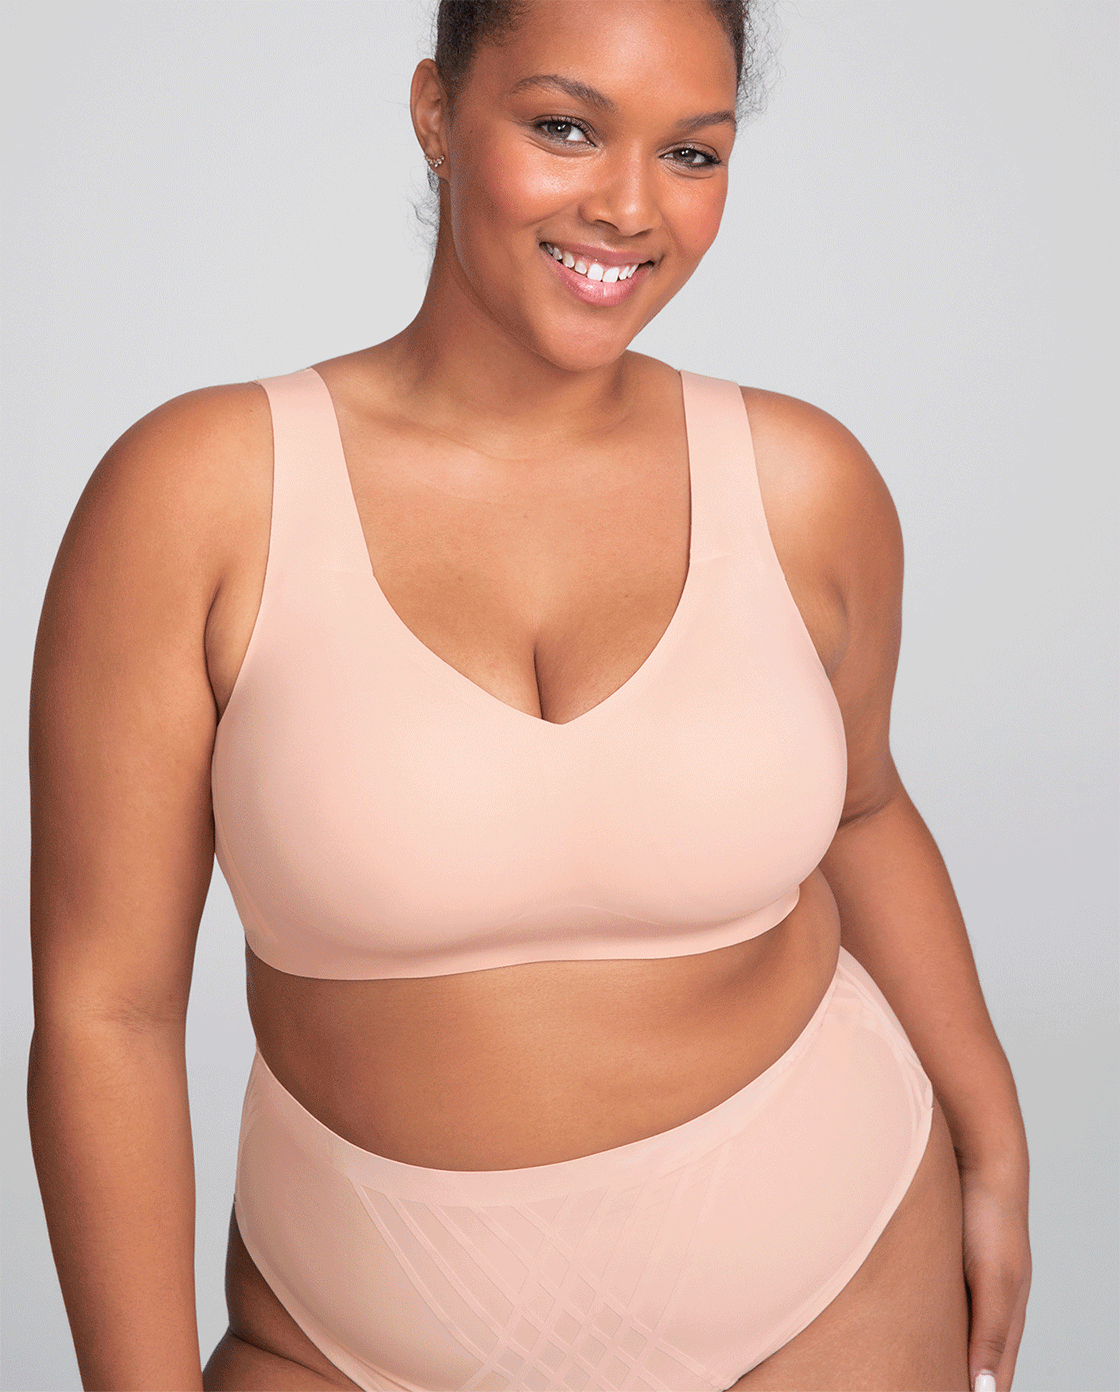 Honeylove: The sold-out V-Neck Bra is BACK!